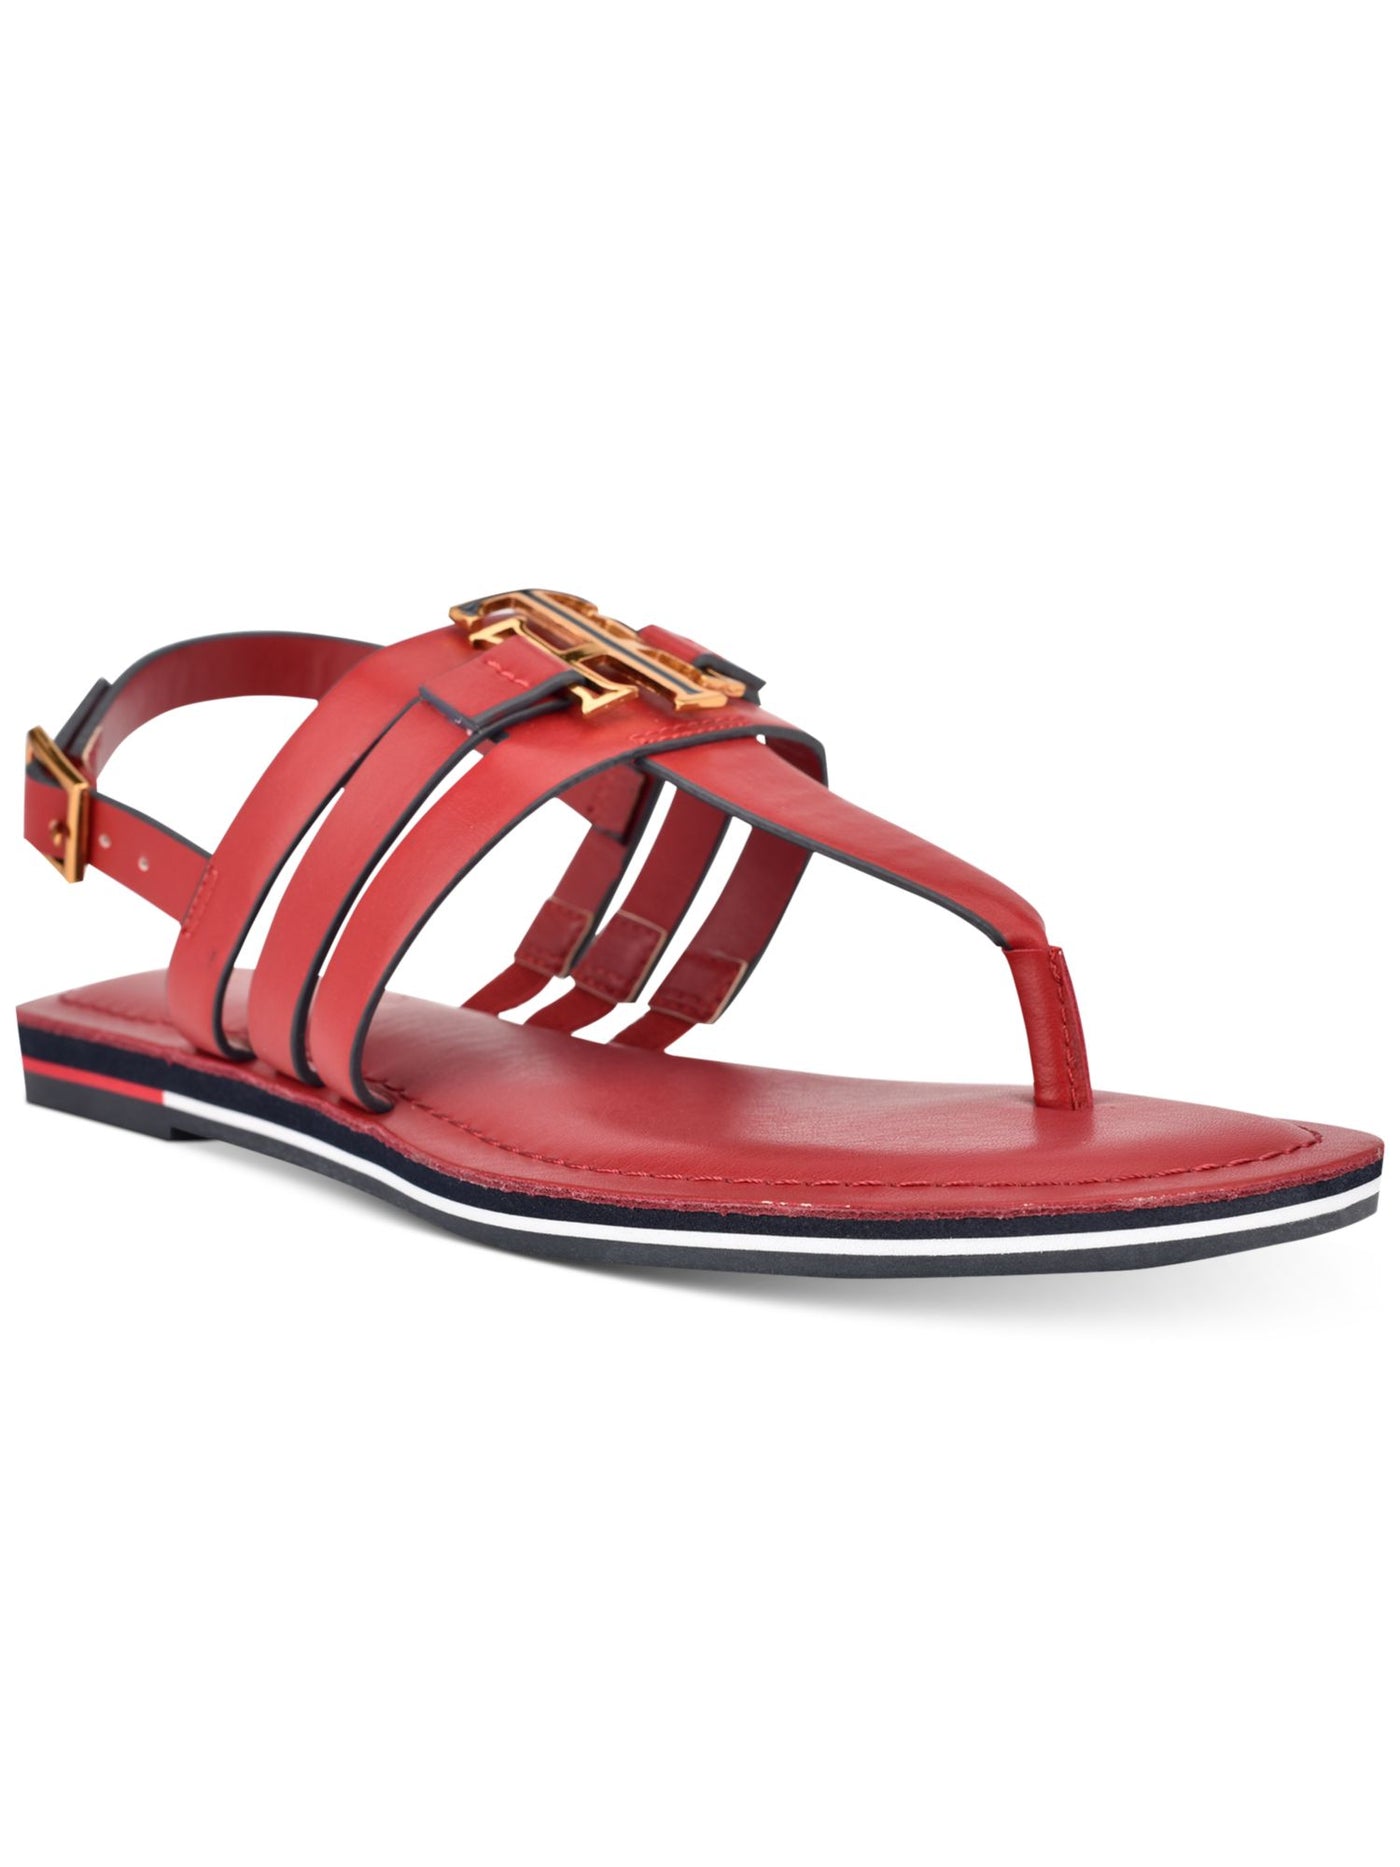 TOMMY HILFIGER Womens Red Logo Adjustable Strap Cushioned Sherlie Round Toe Buckle Thong Sandals Shoes 6 M